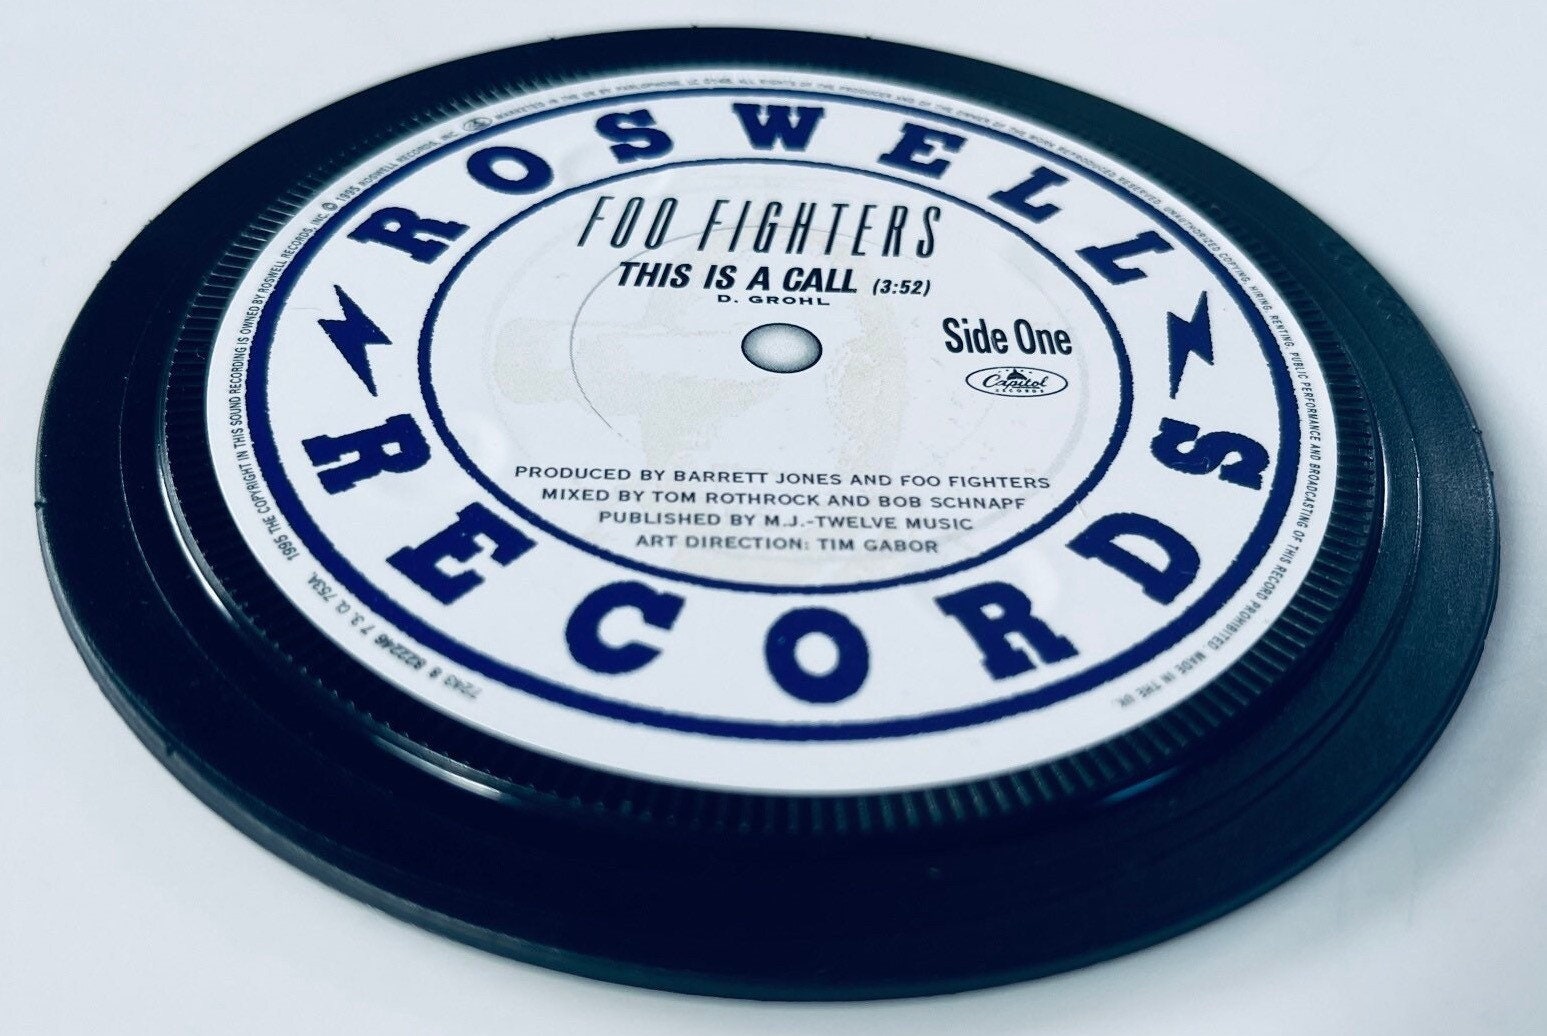 Fighters Records